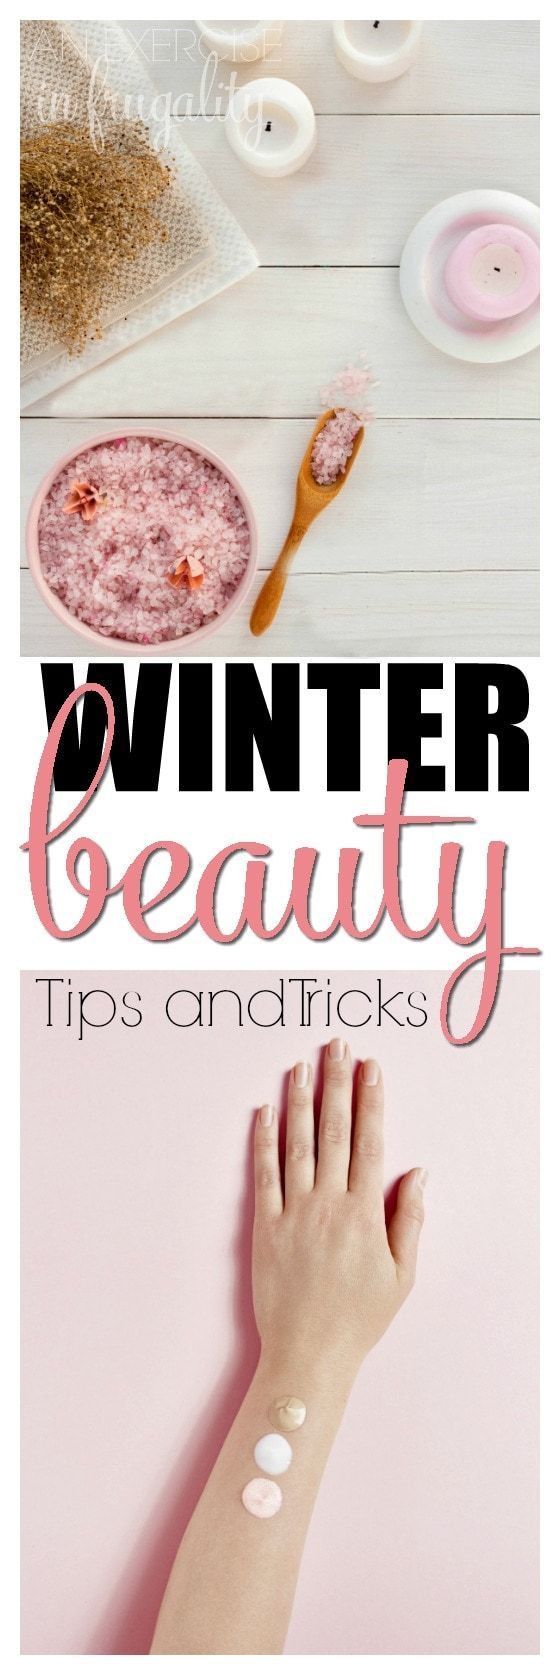 Winter Beauty Tips | An Exercise in Frugality - Winter Beauty Tips | An Exercise in Frugality -   14 winter beauty Tips ideas